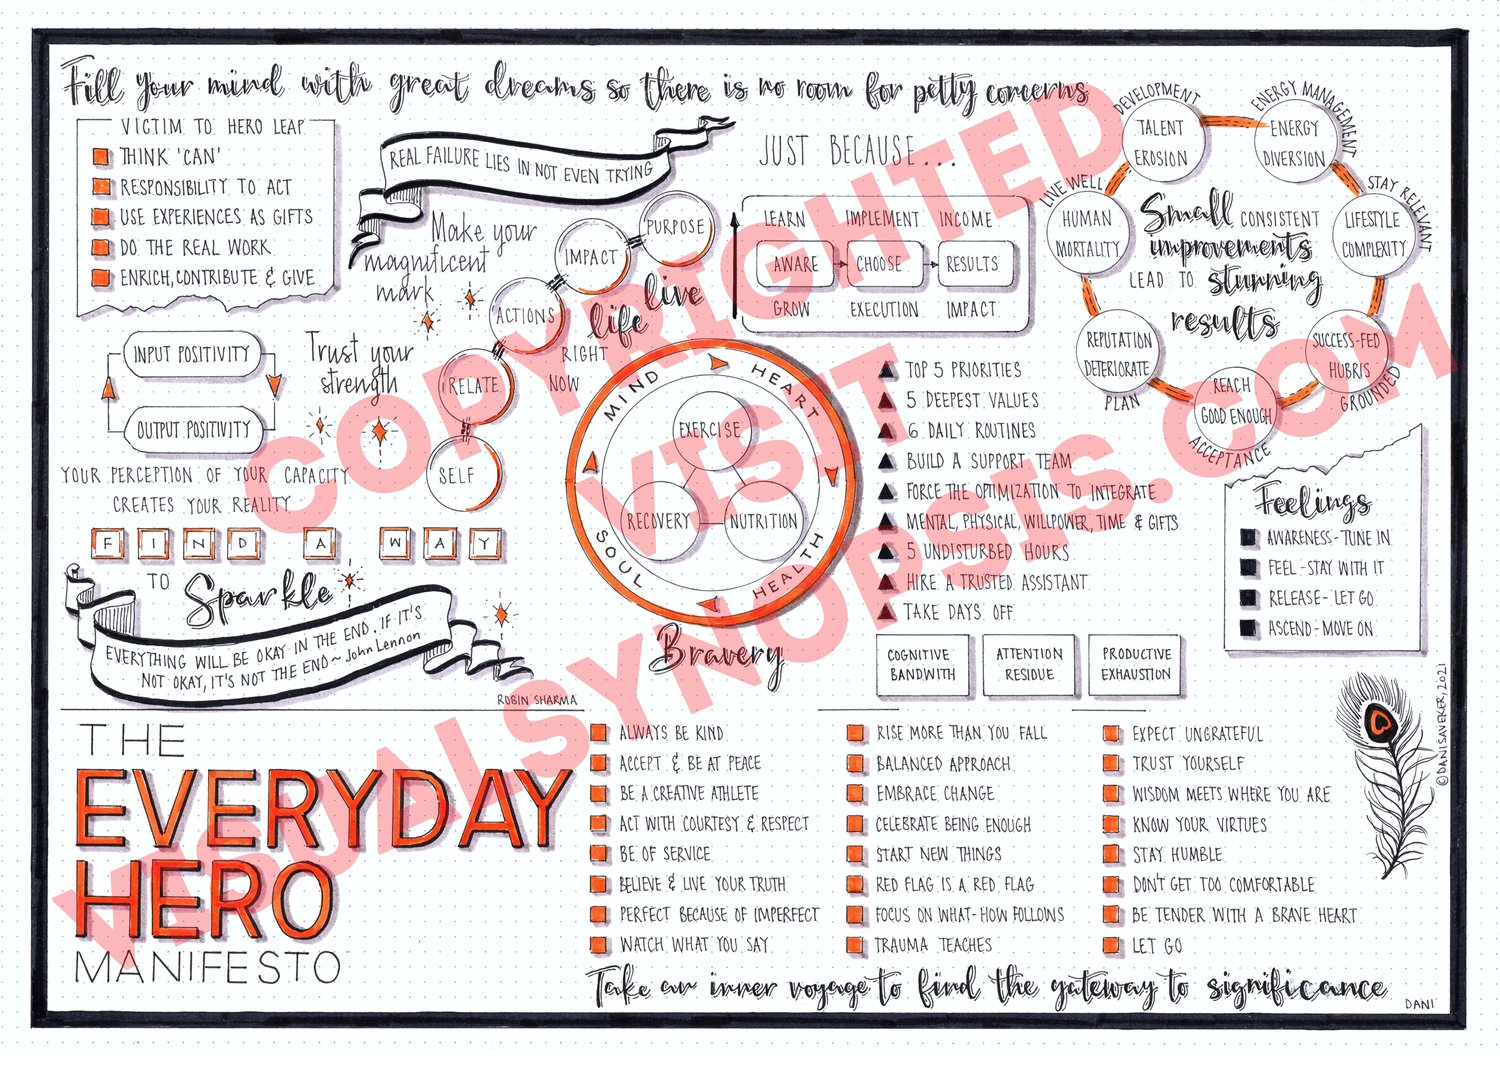 Tuesdays With Morrie (Mitch Albom) visual synopsis by Dani Saveker — Visual  Synopsis